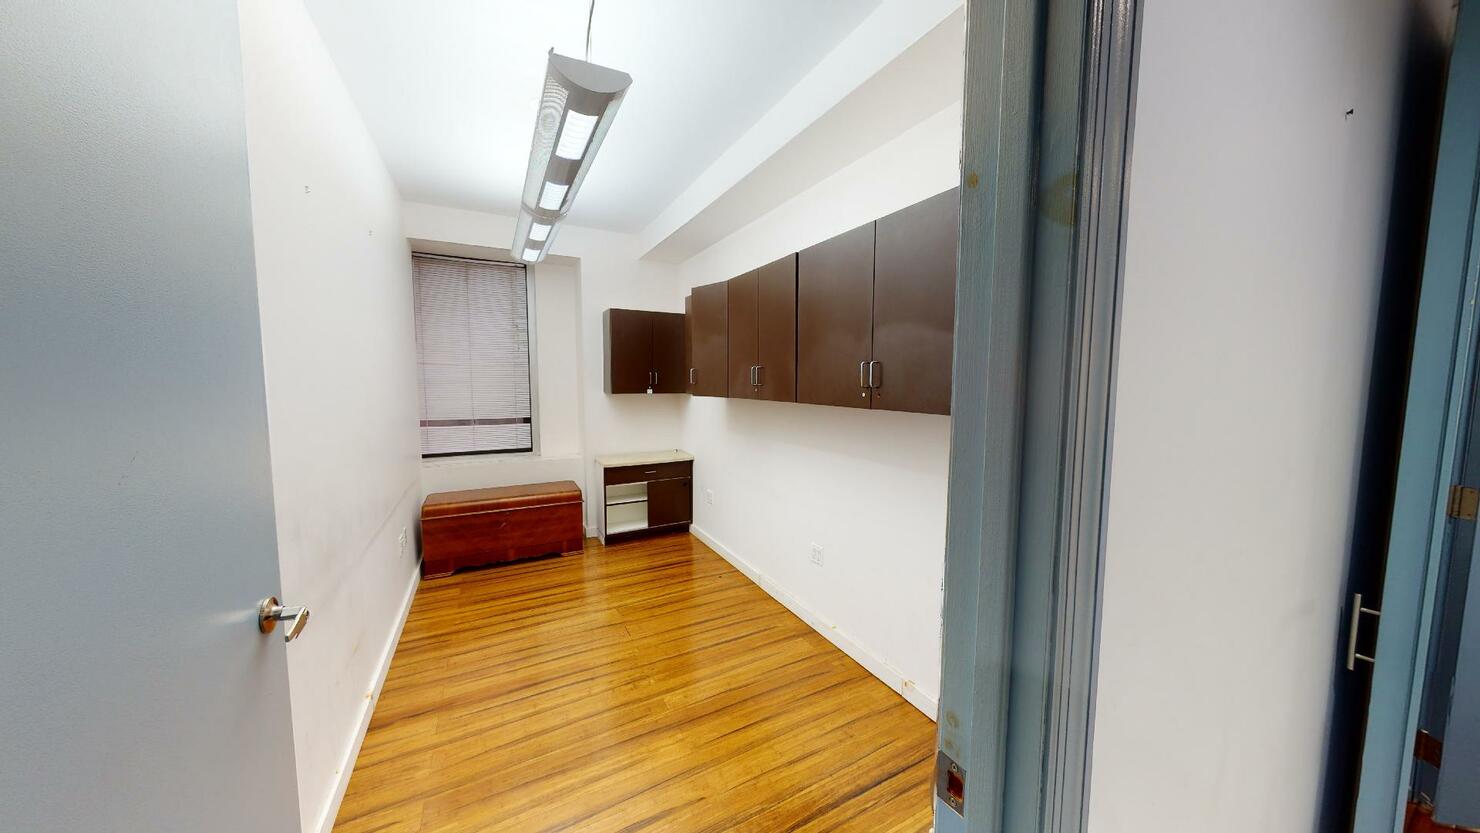 369 Lexington Avenue Office Space - Treatment Room with Shelving